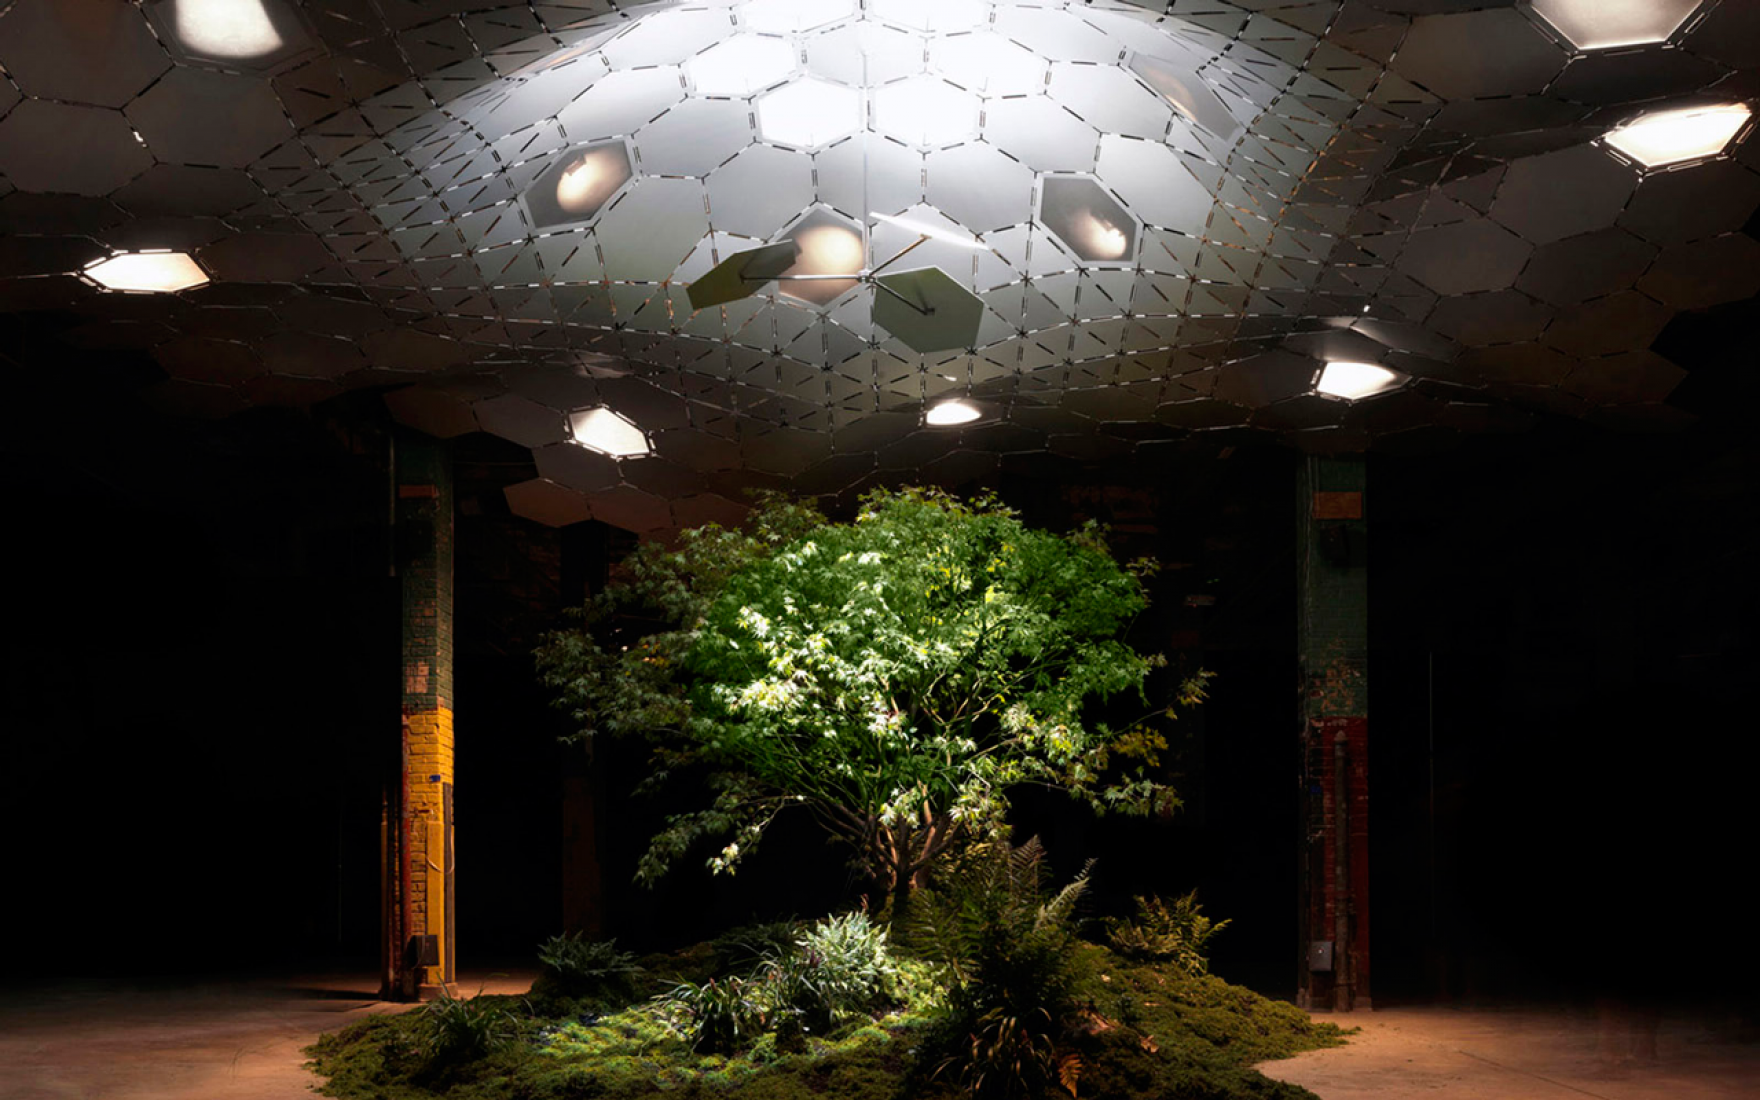 This is the final exhibition, featuring a live green space with a solar canopy and Lowline technology overhead.